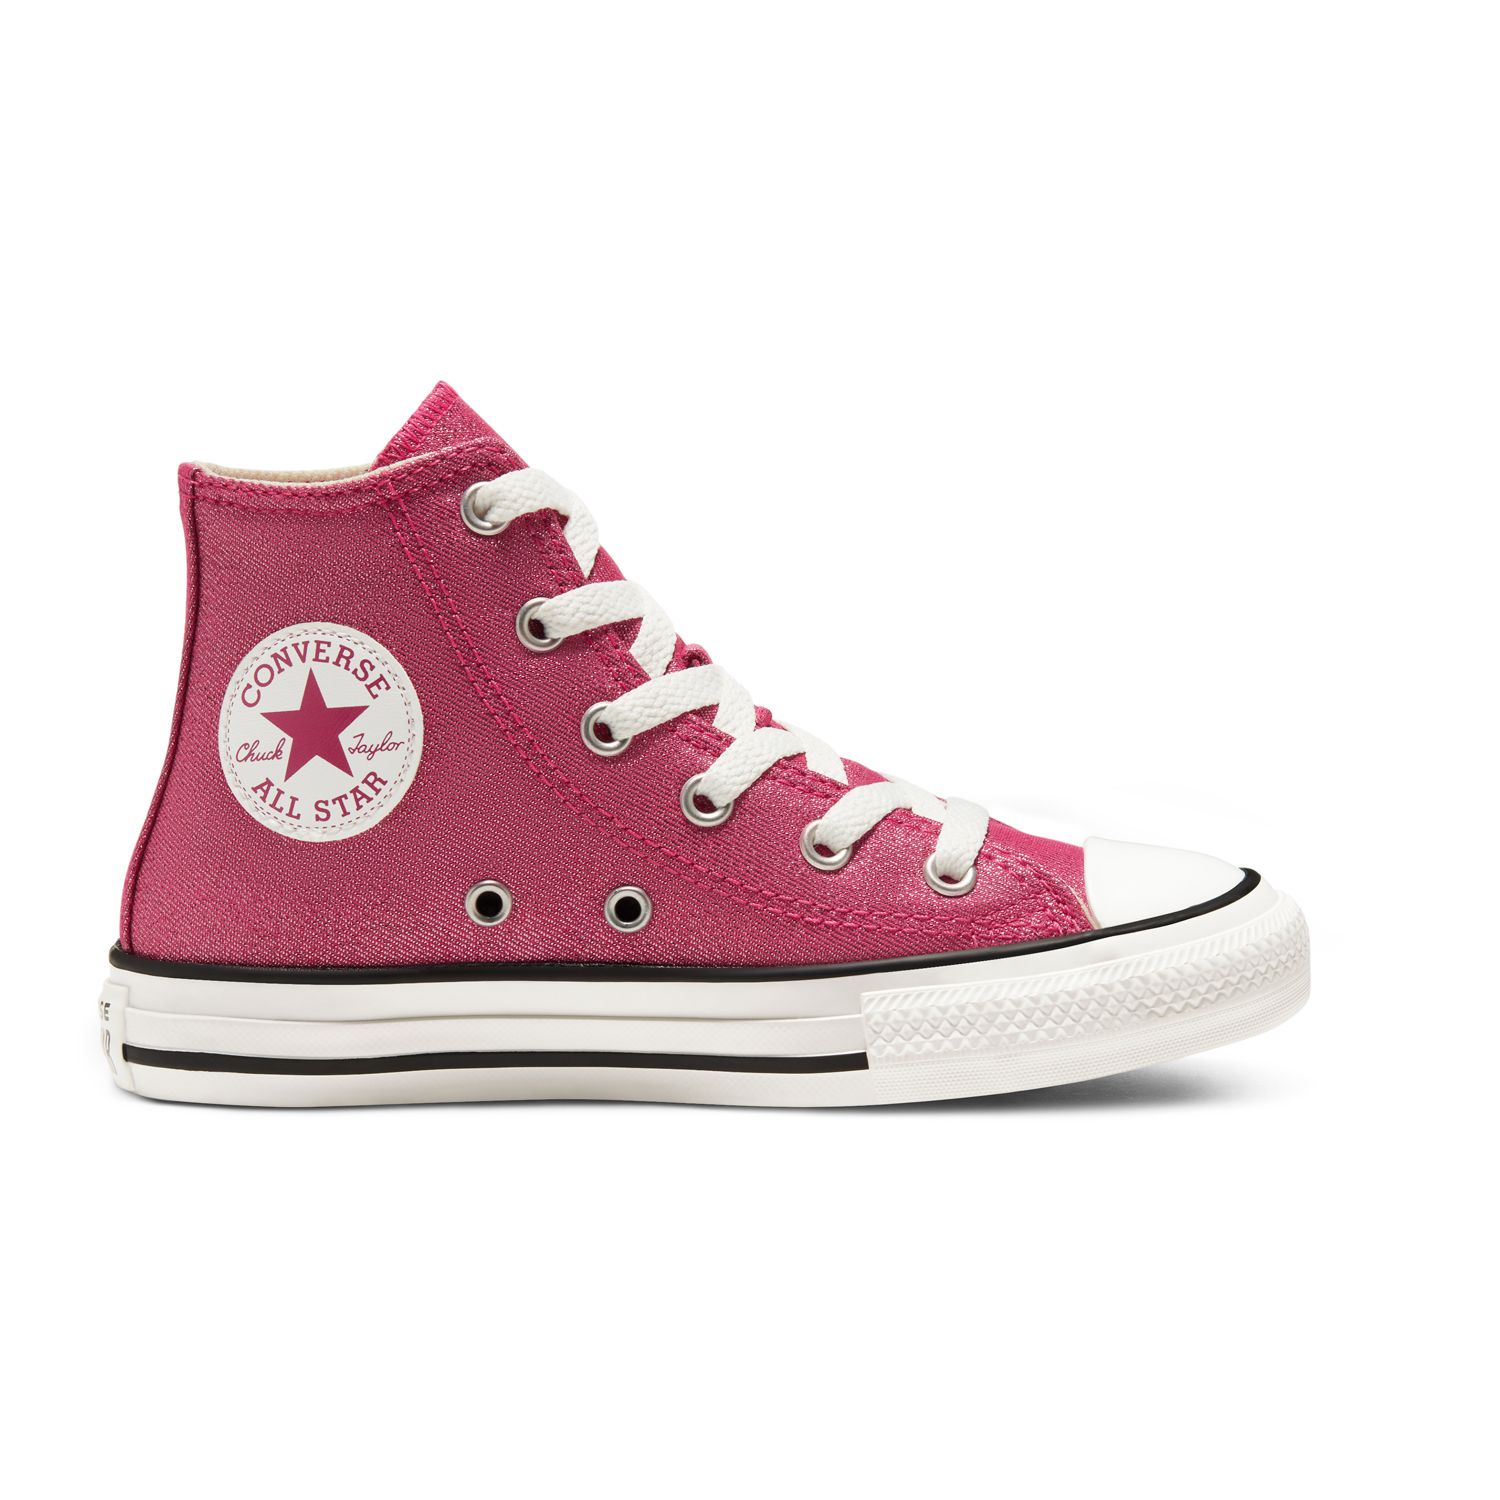 Kids' Converse Chuck Taylor All Star Sparkle High Top Shoes